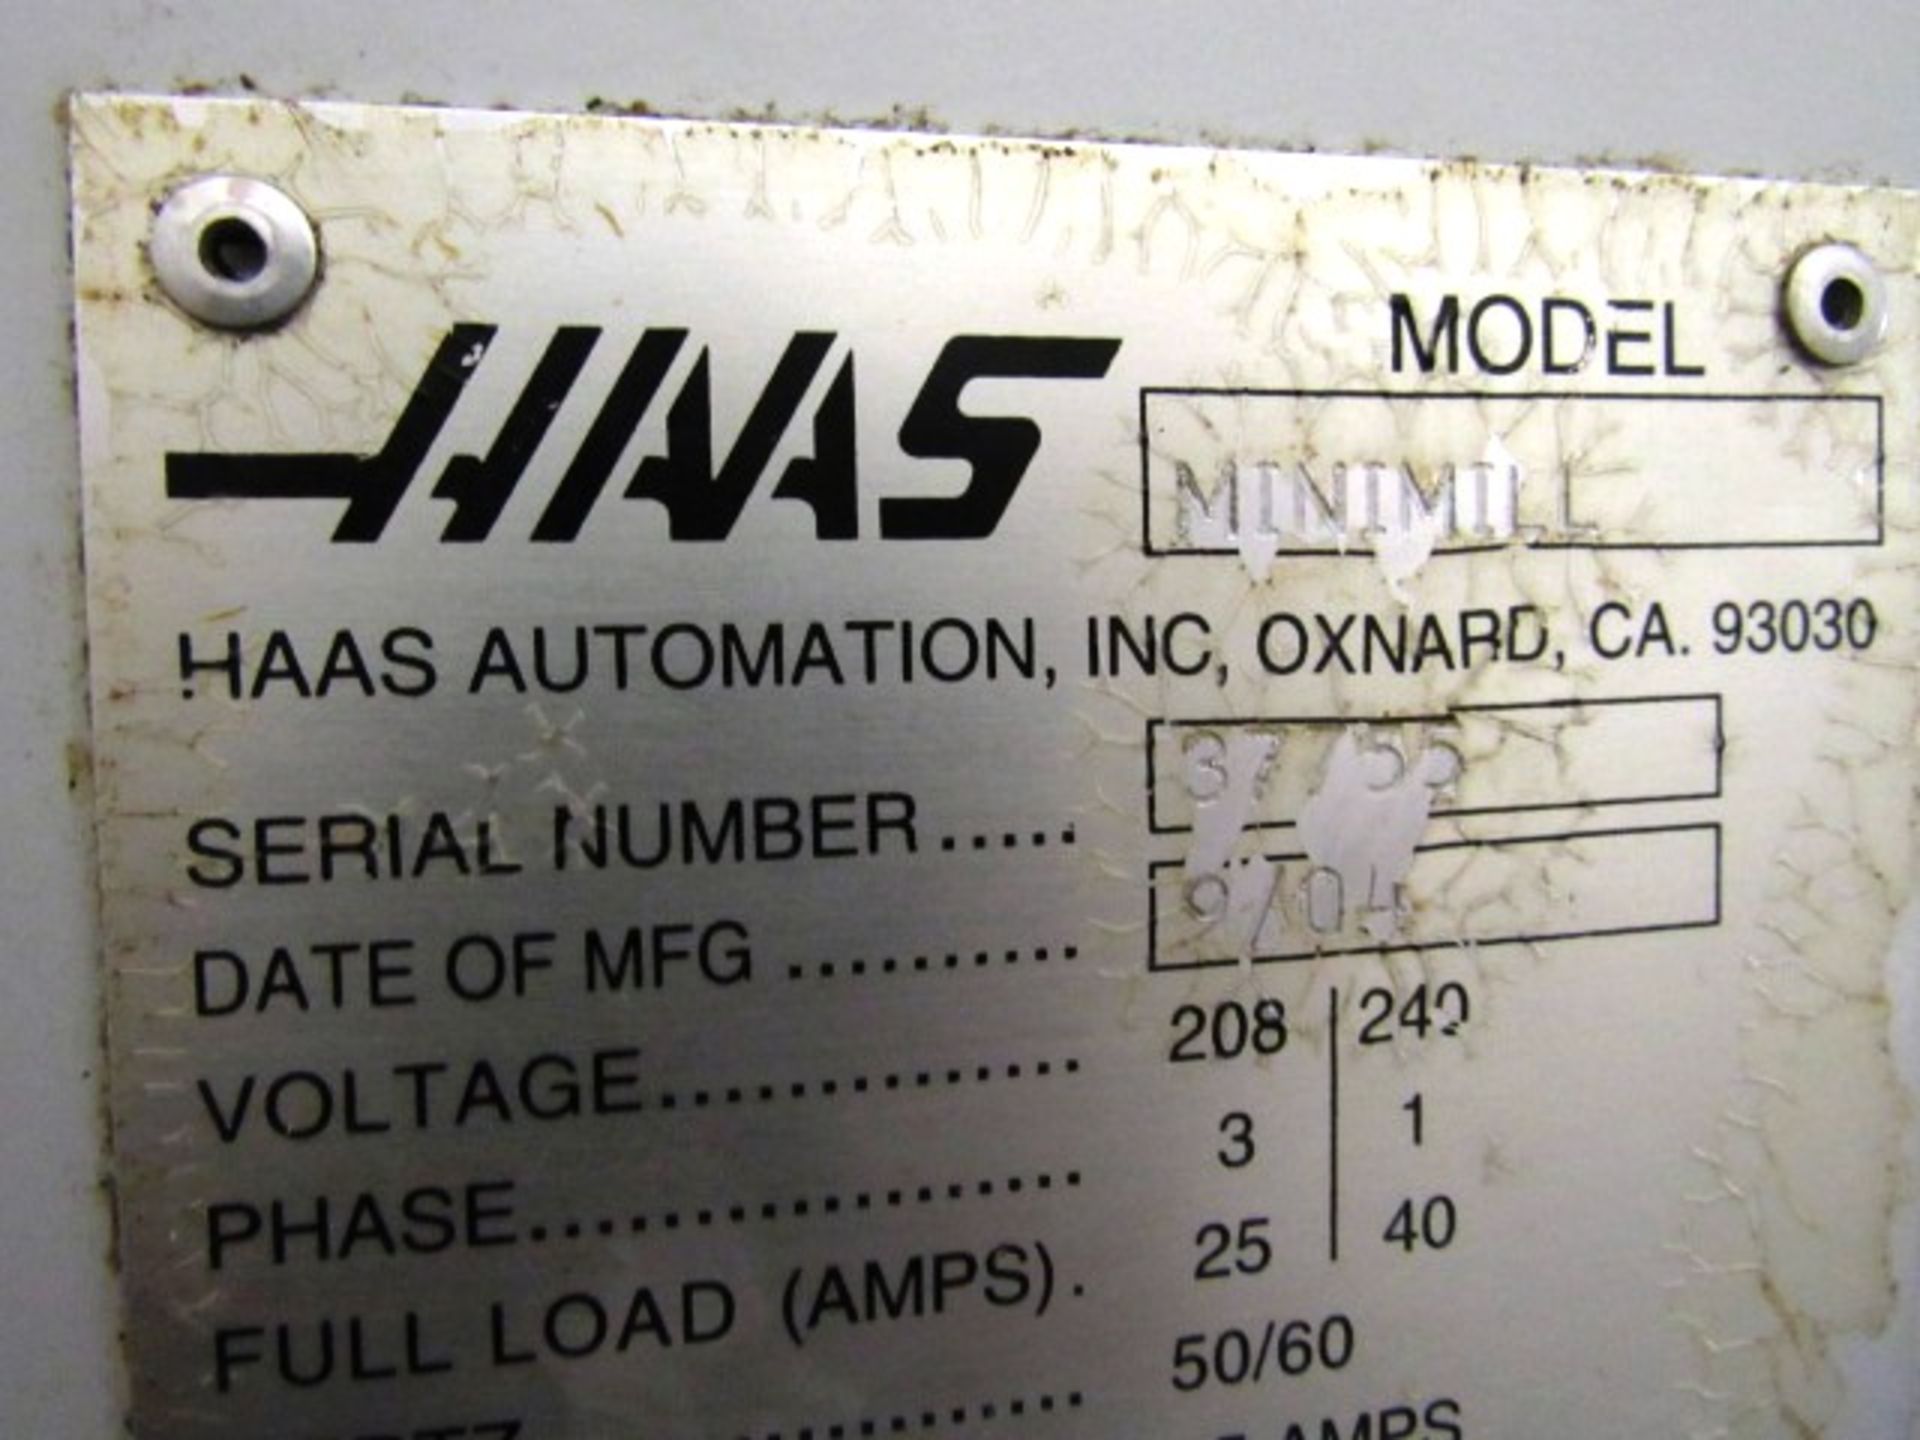 Haas Mini-Mill 3-Axis CNC Machining Center - Image 7 of 7